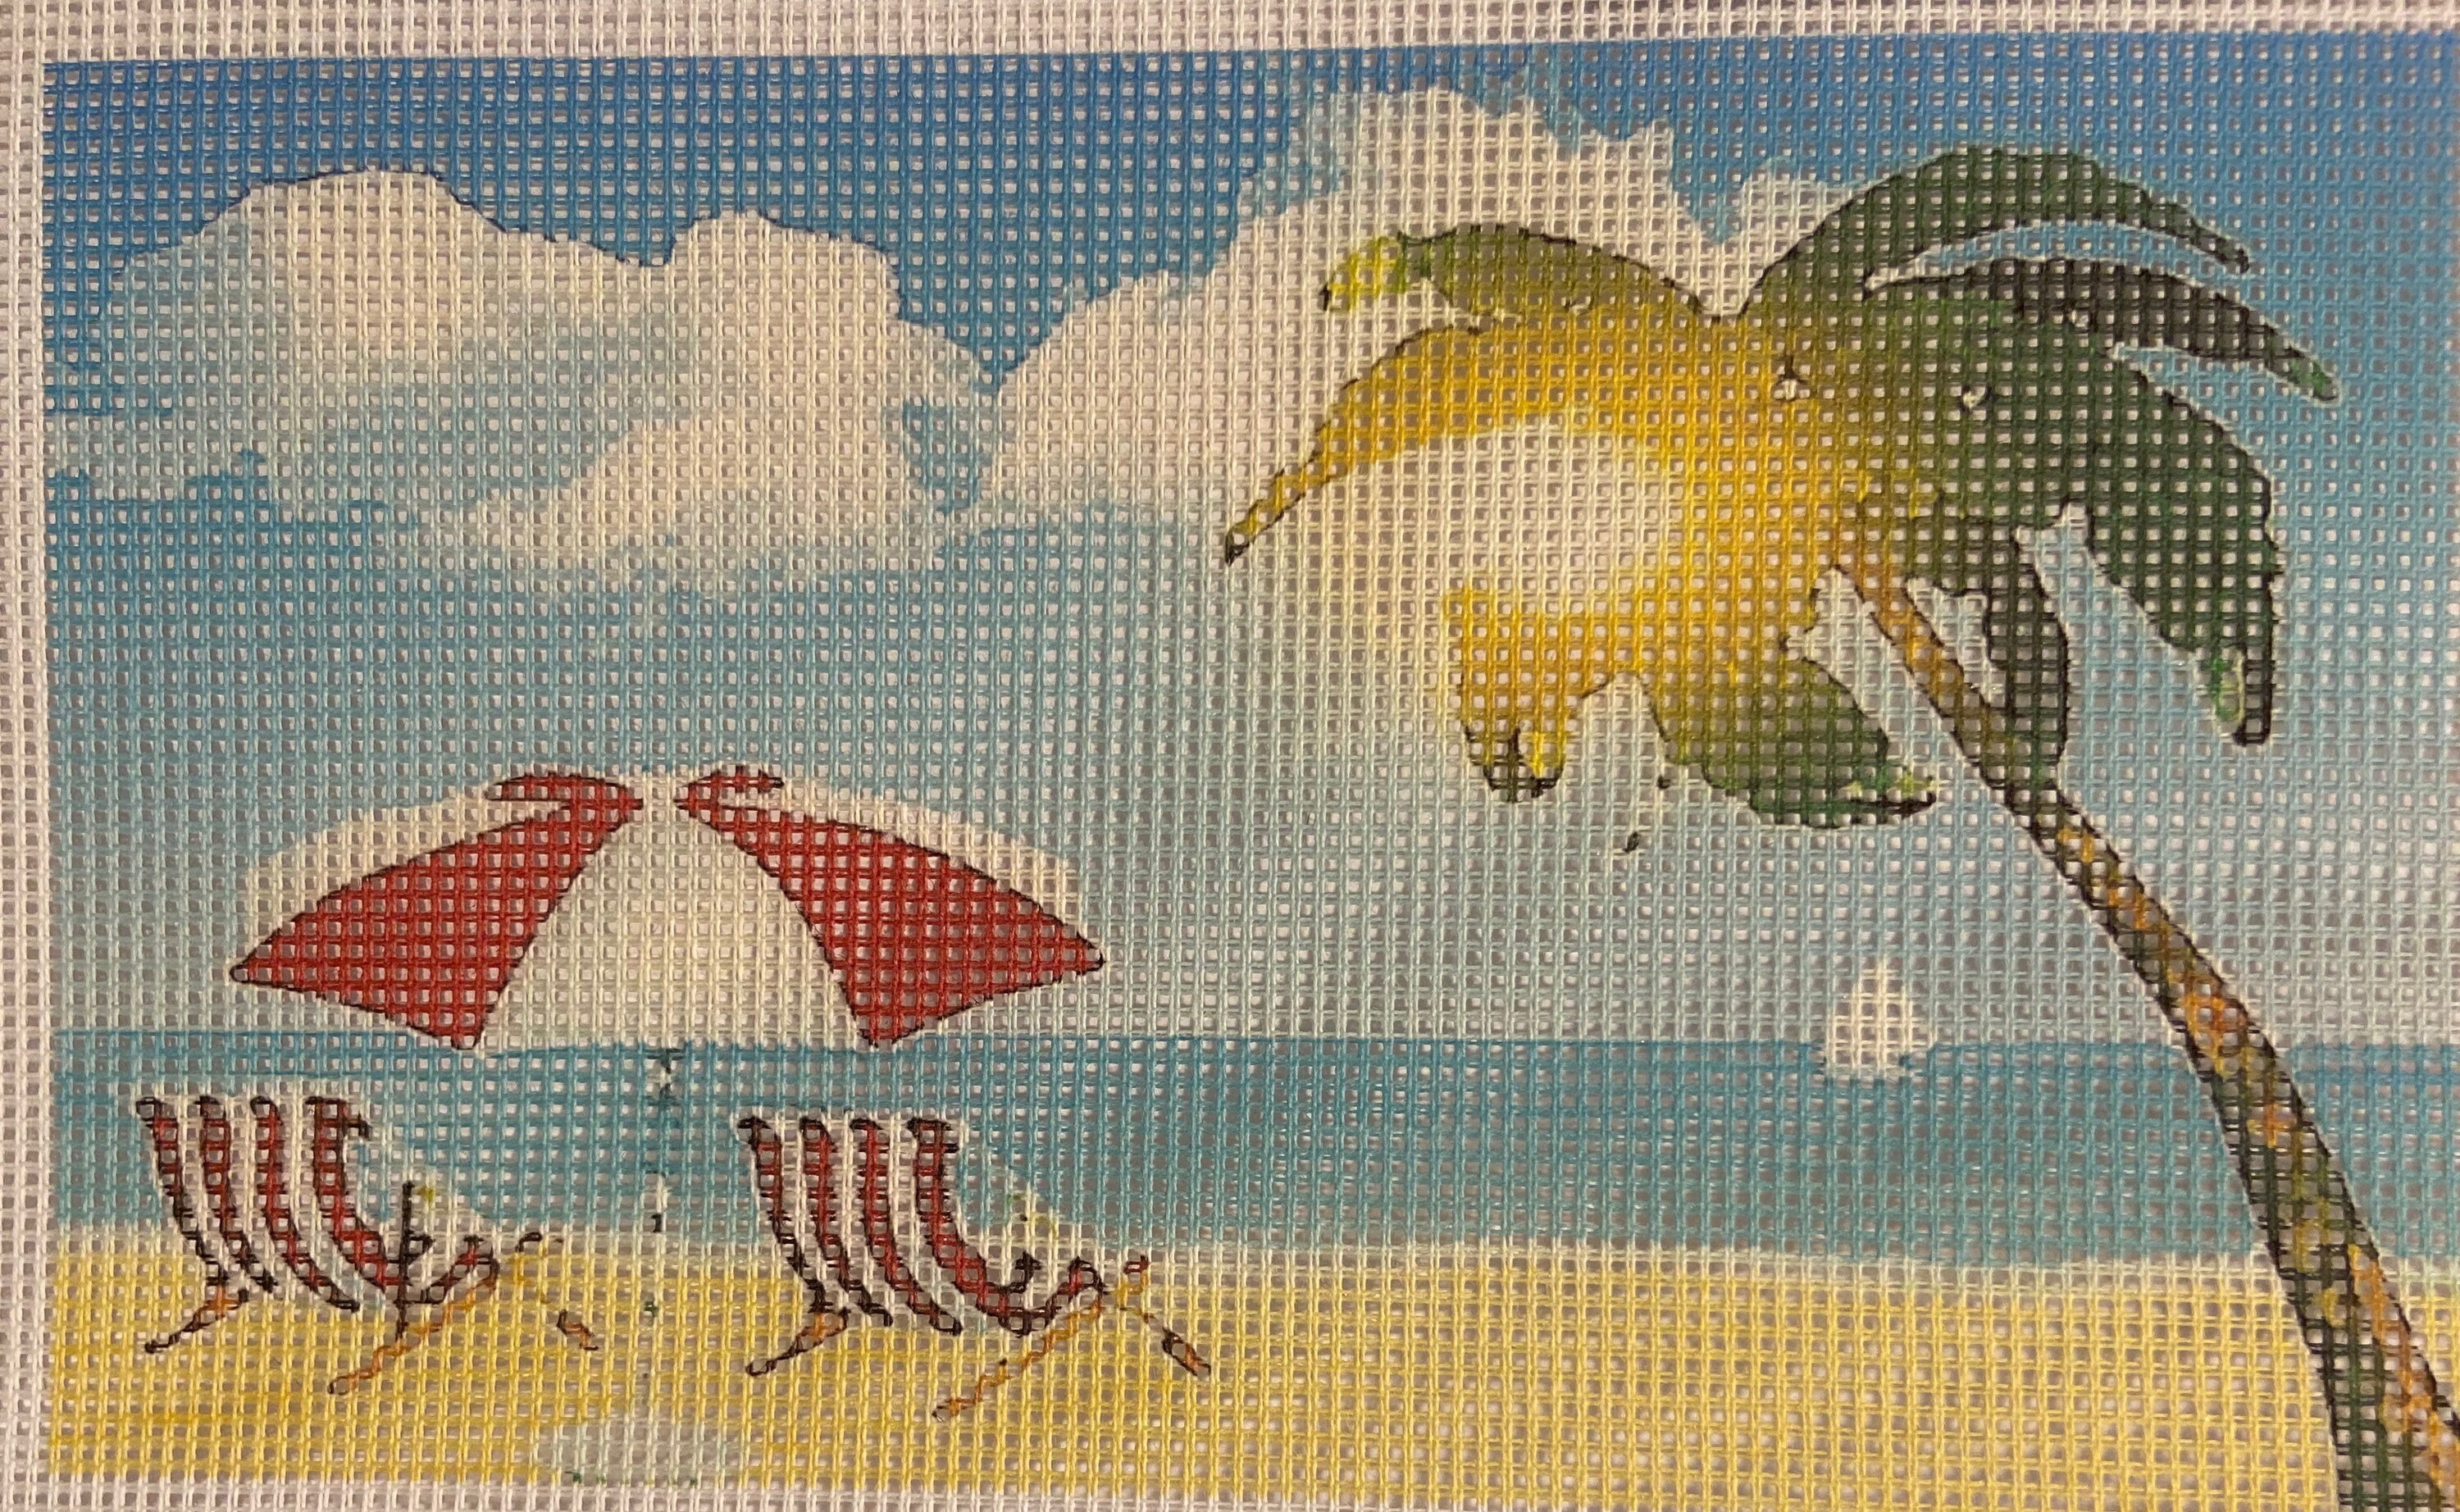 Kids at the Beach Finished Wool Needlepoint Panel 12x12, Children Playing  in the Sand Needle Point Completed 